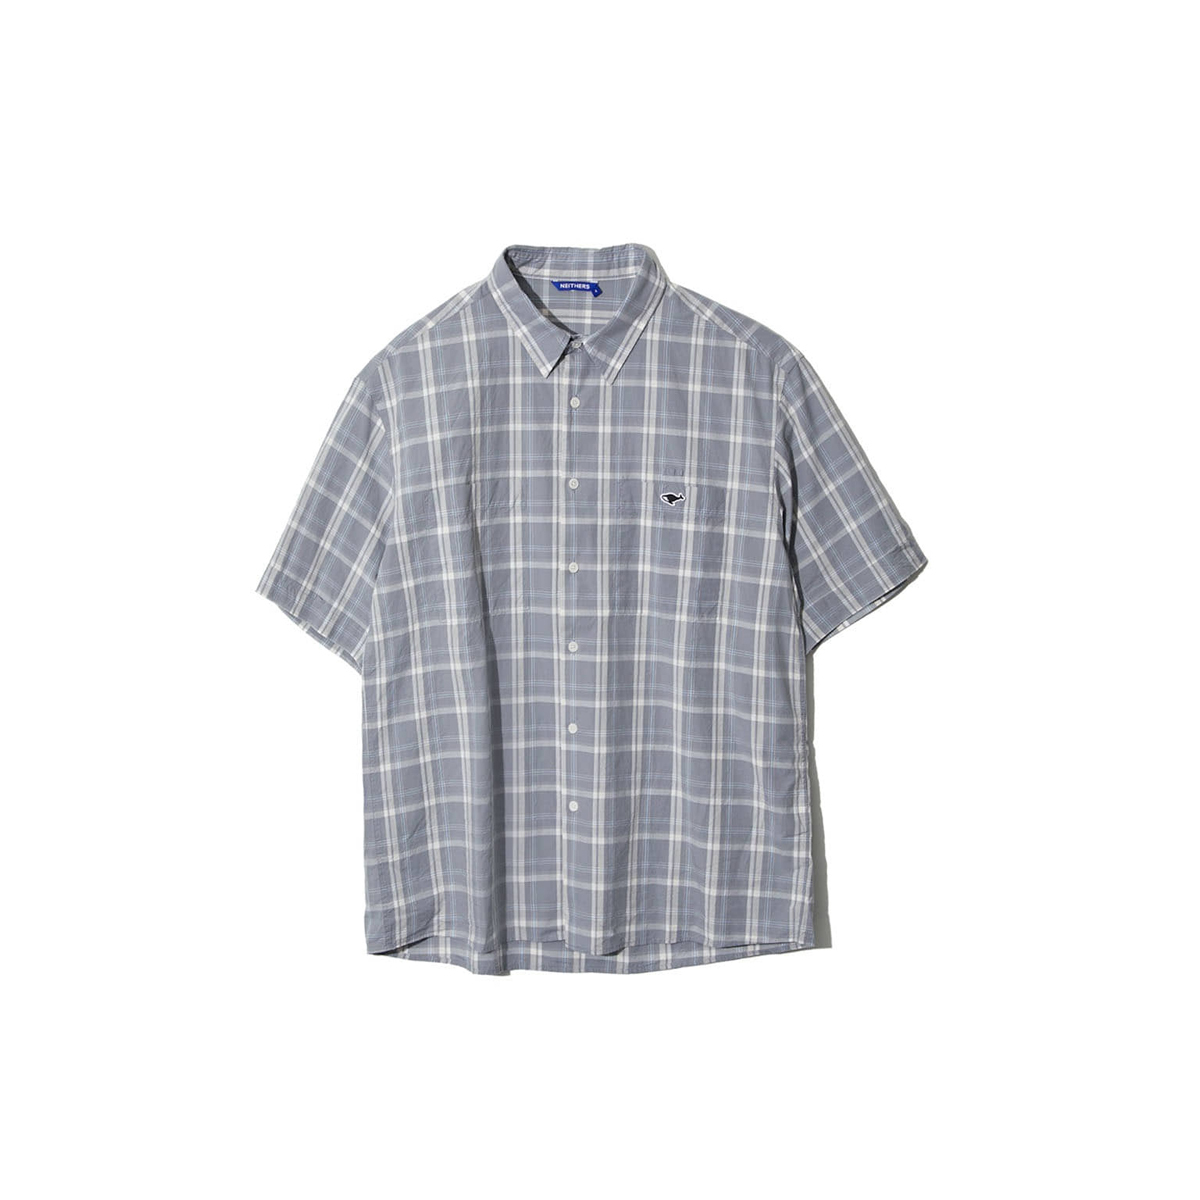 Neithers - Relaxed S/S Shirt - Grey Check